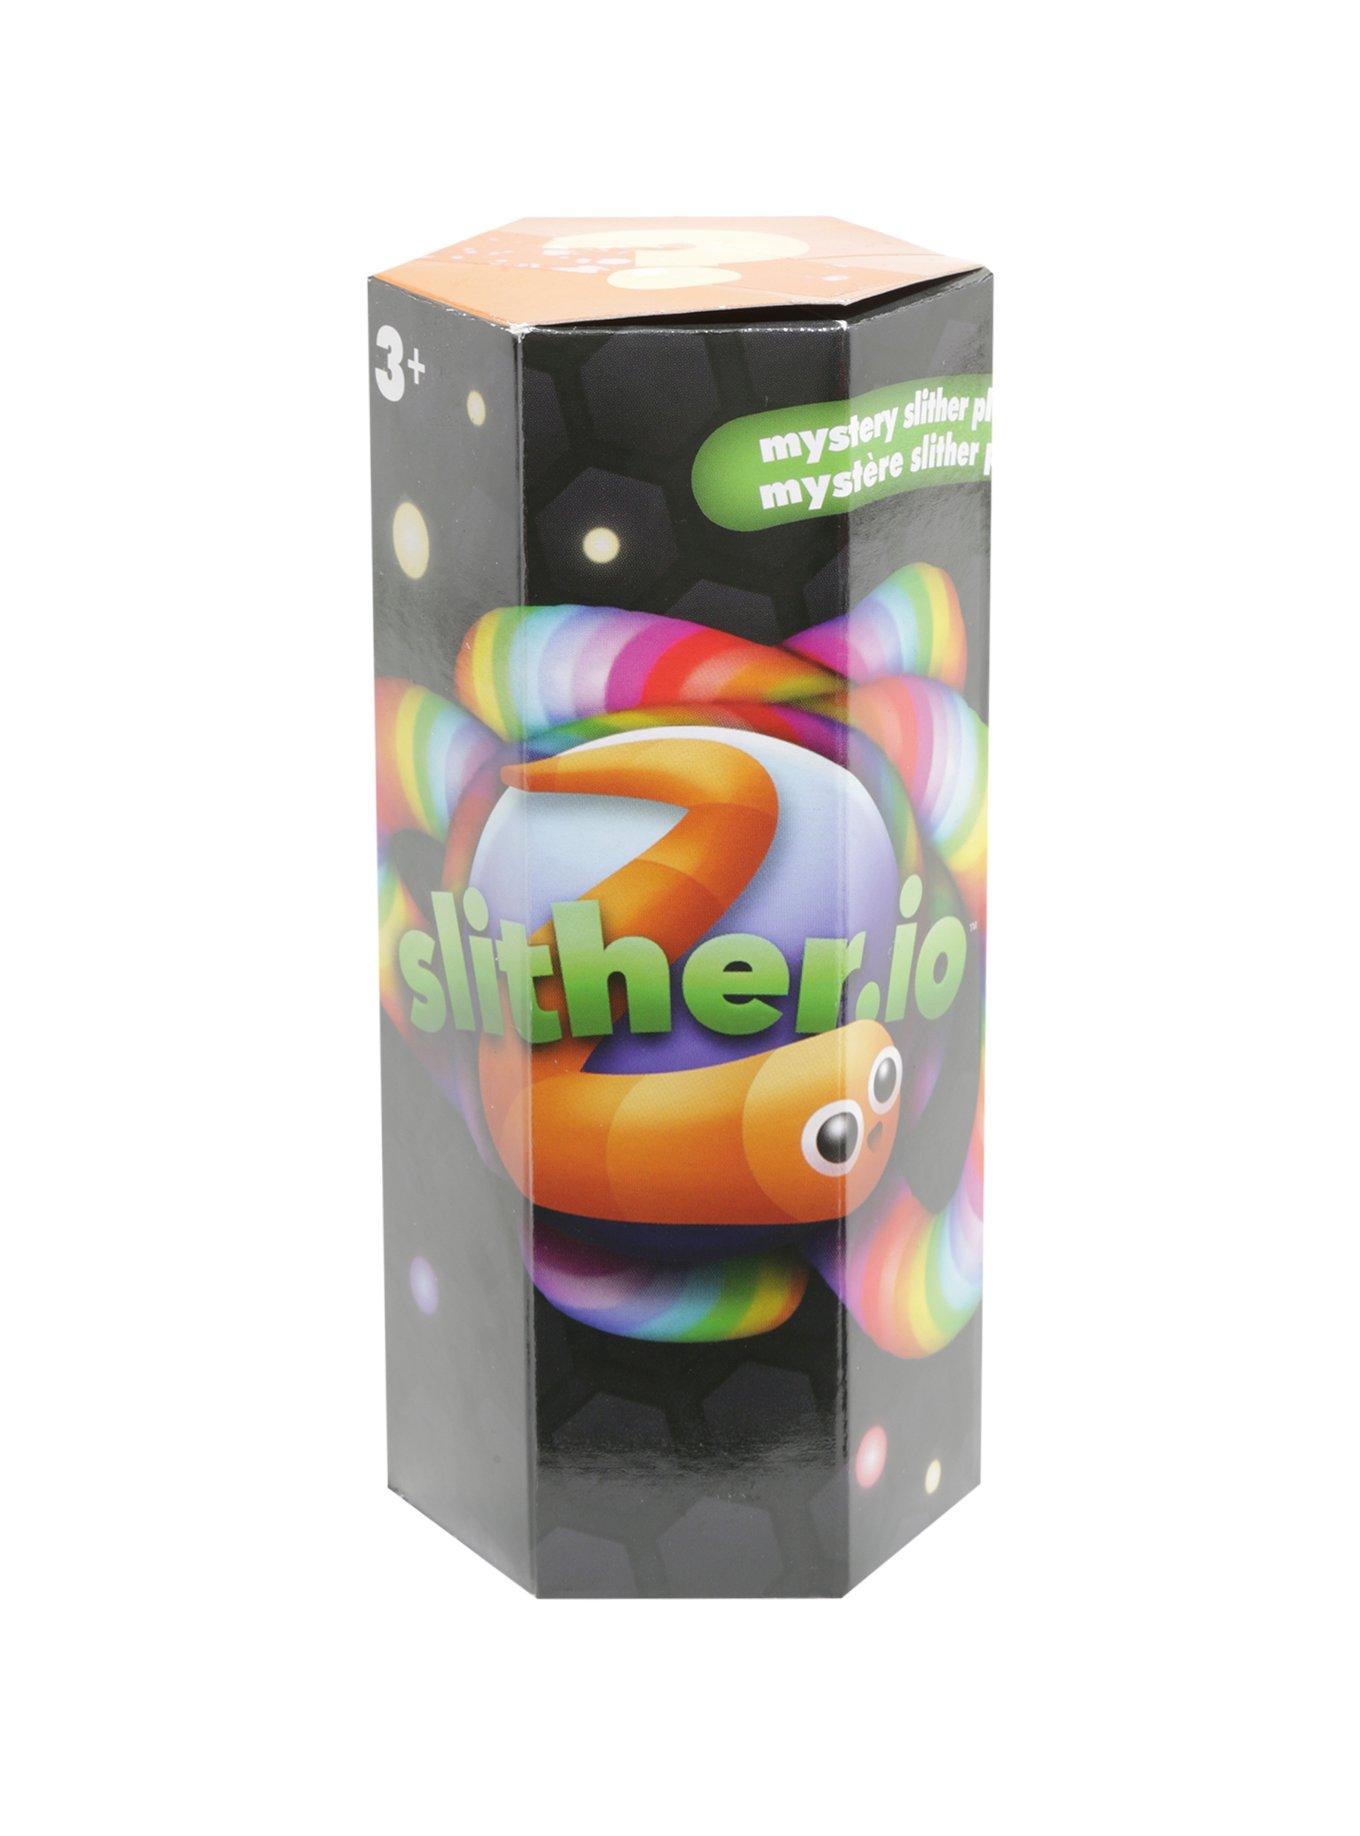 Slither.io Series 1 Mystery Slither Blind Box Plush Key Chain